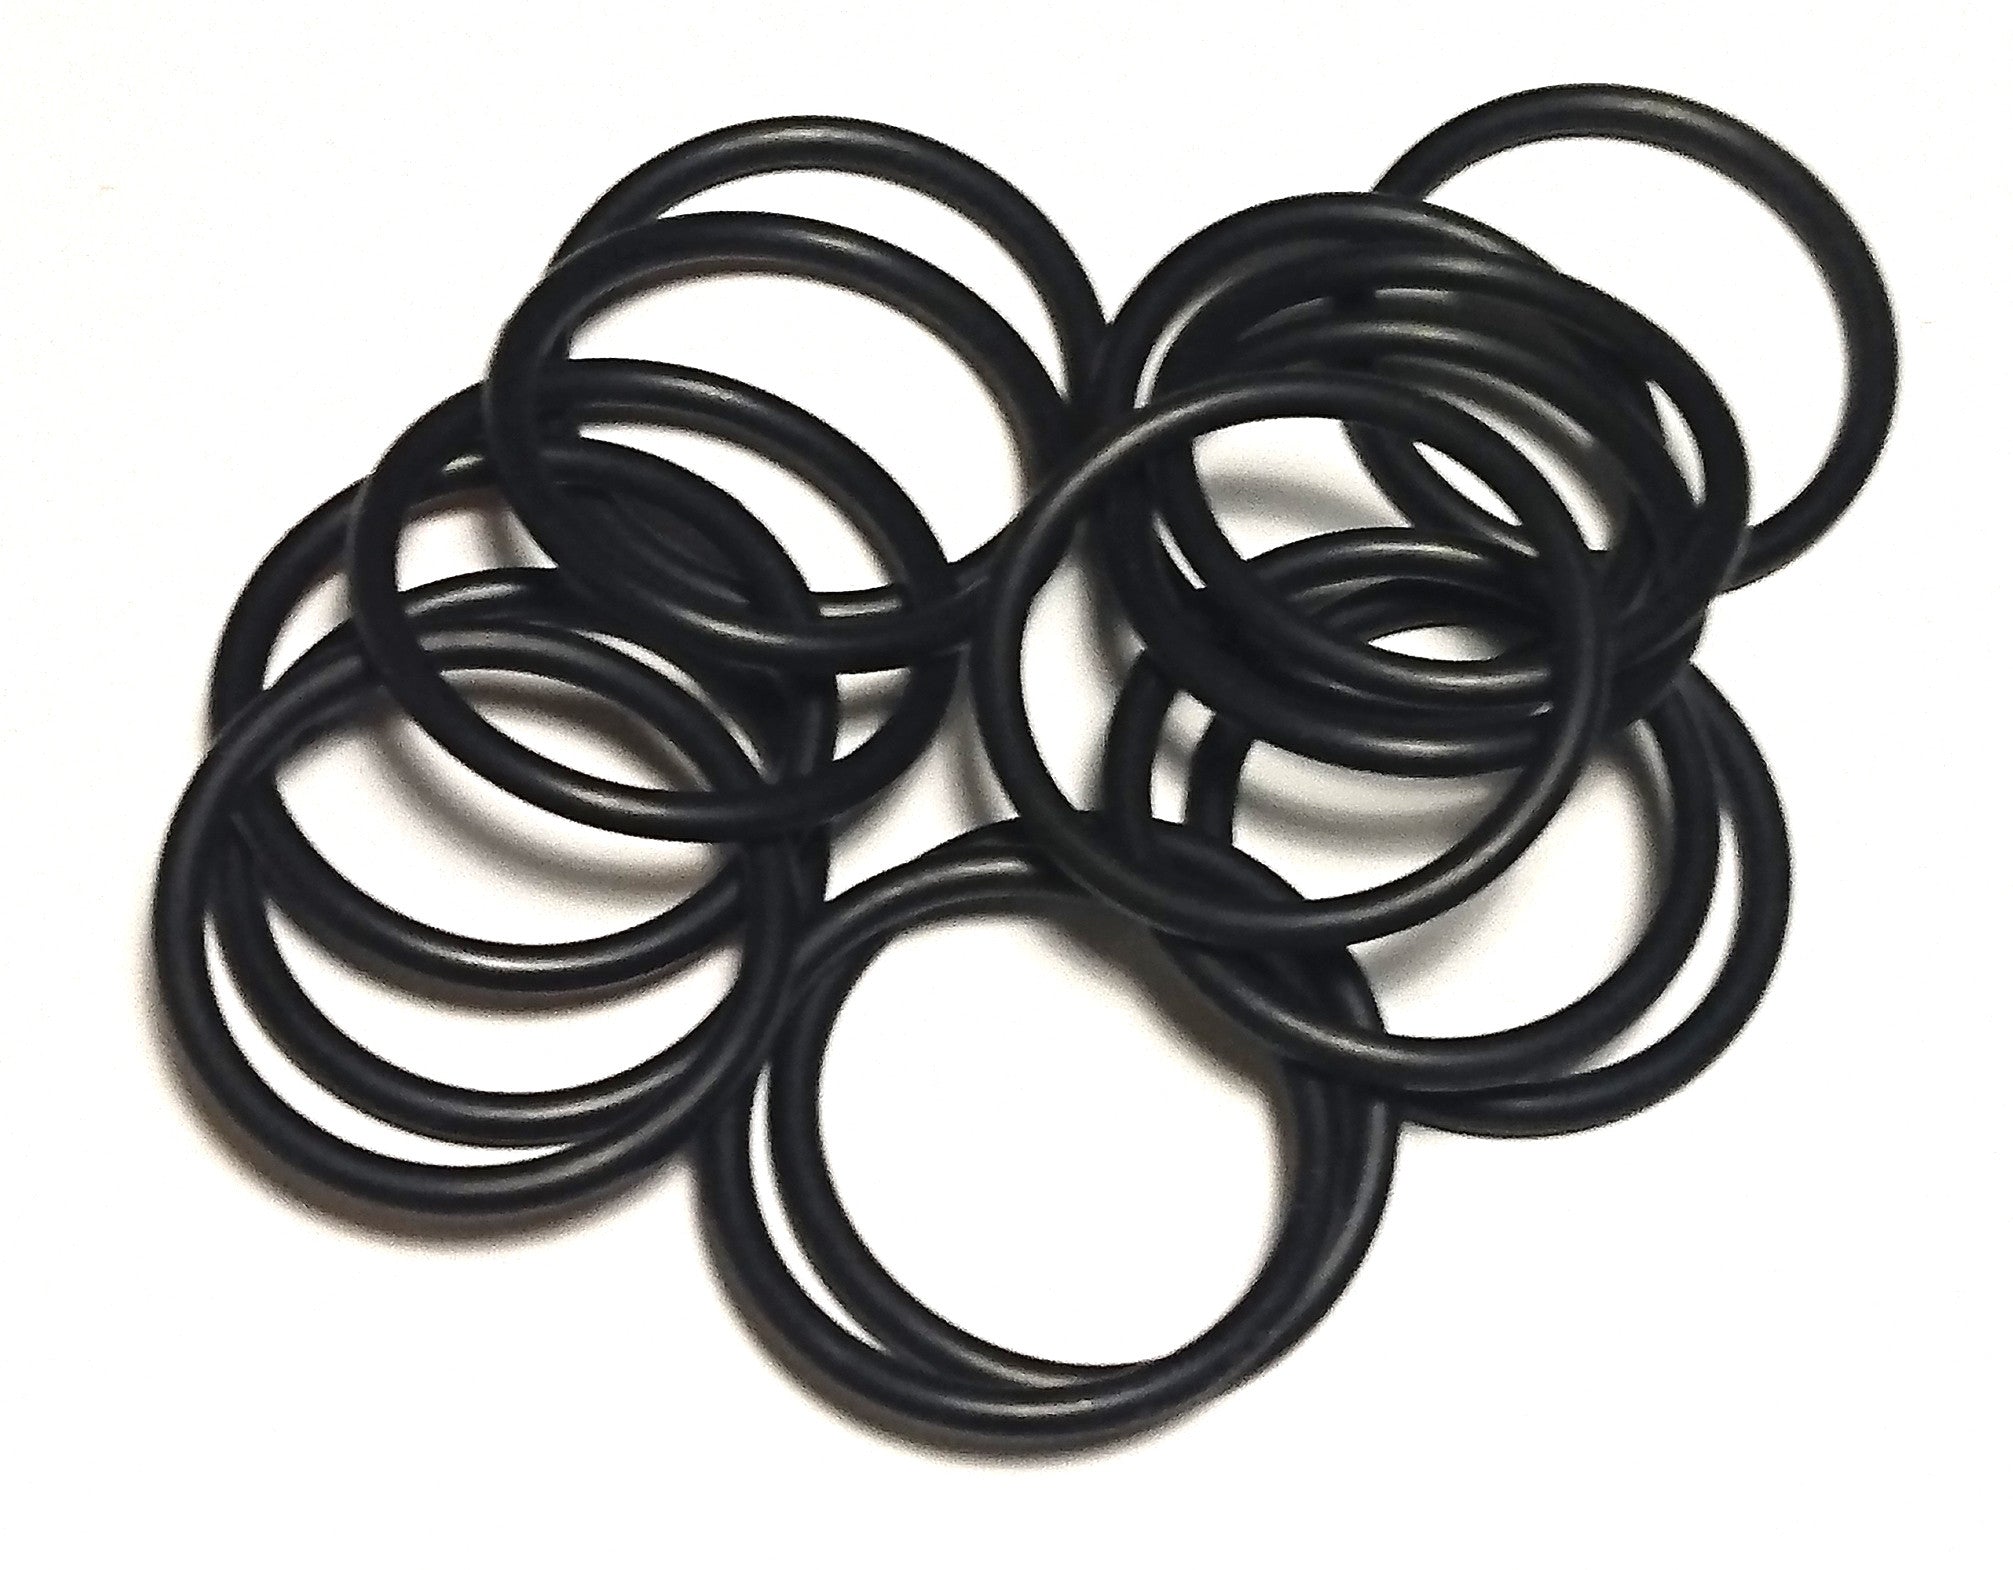 O-rings 20x2mm for MD1 (15 pcs)